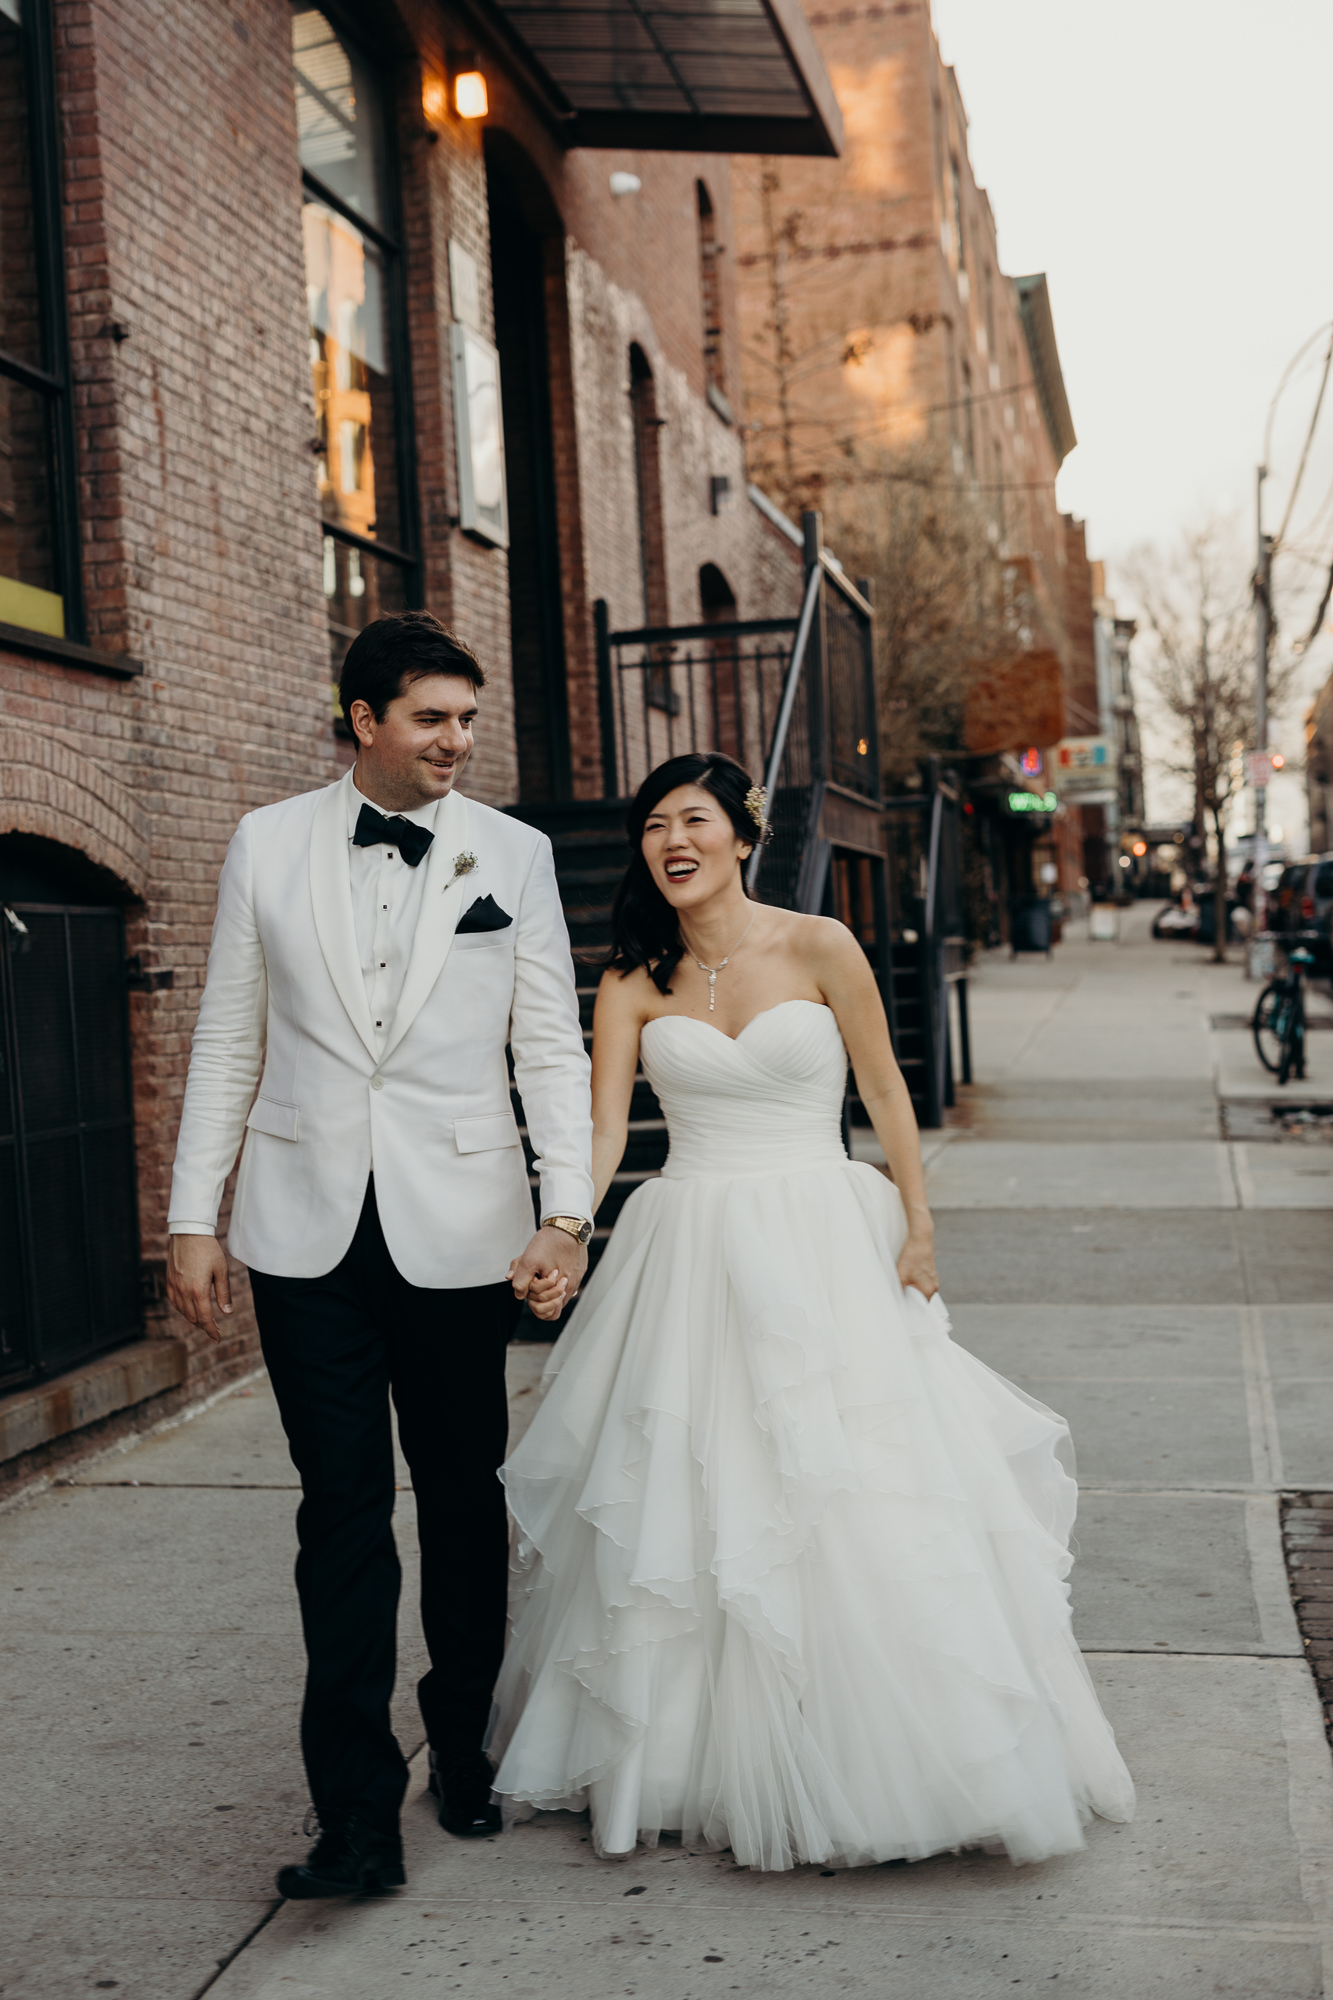 a portrait of a bride and groom at mymoon in brooklyn, new york